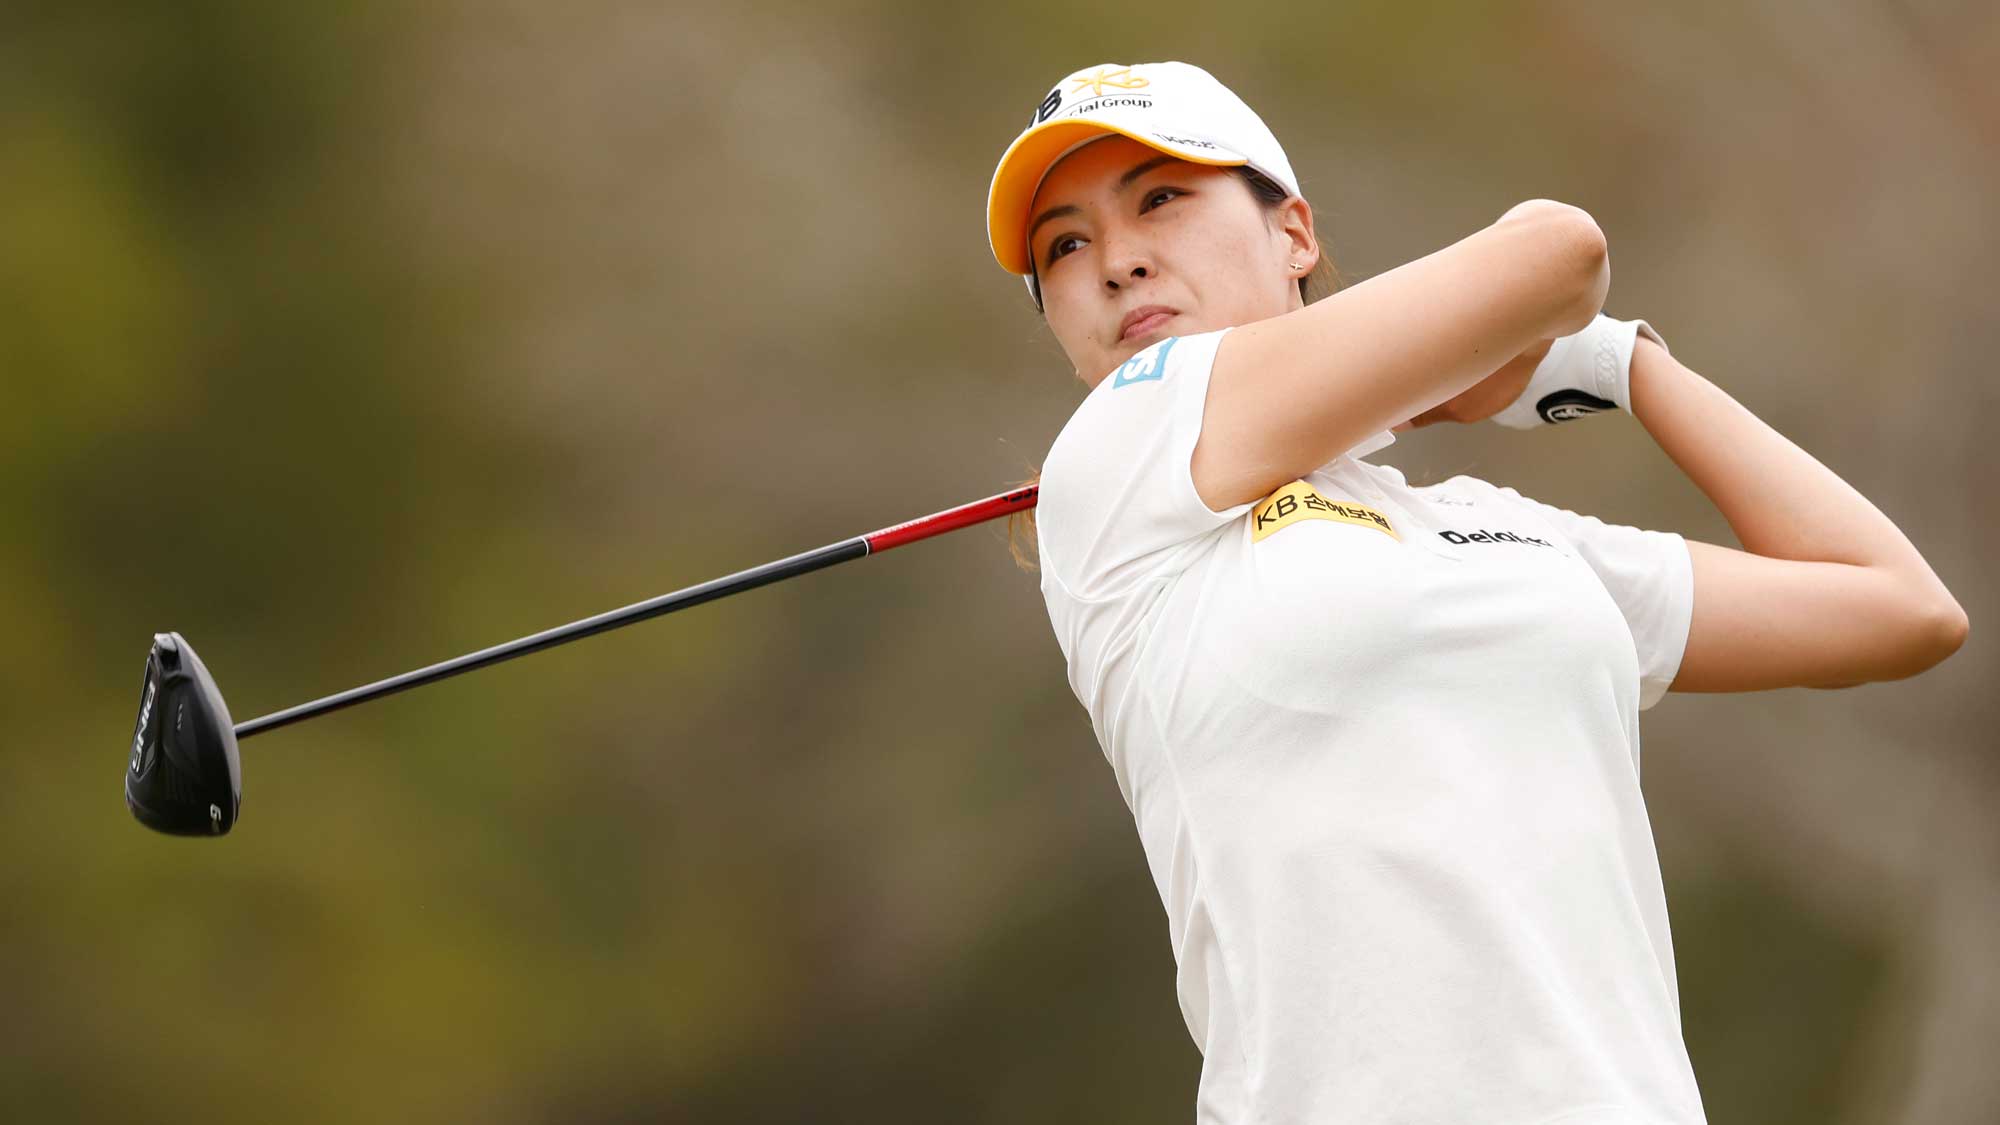 In-gee Chun of Korea plays her shot from the third tee during the first round of the CME Group Tour Championship